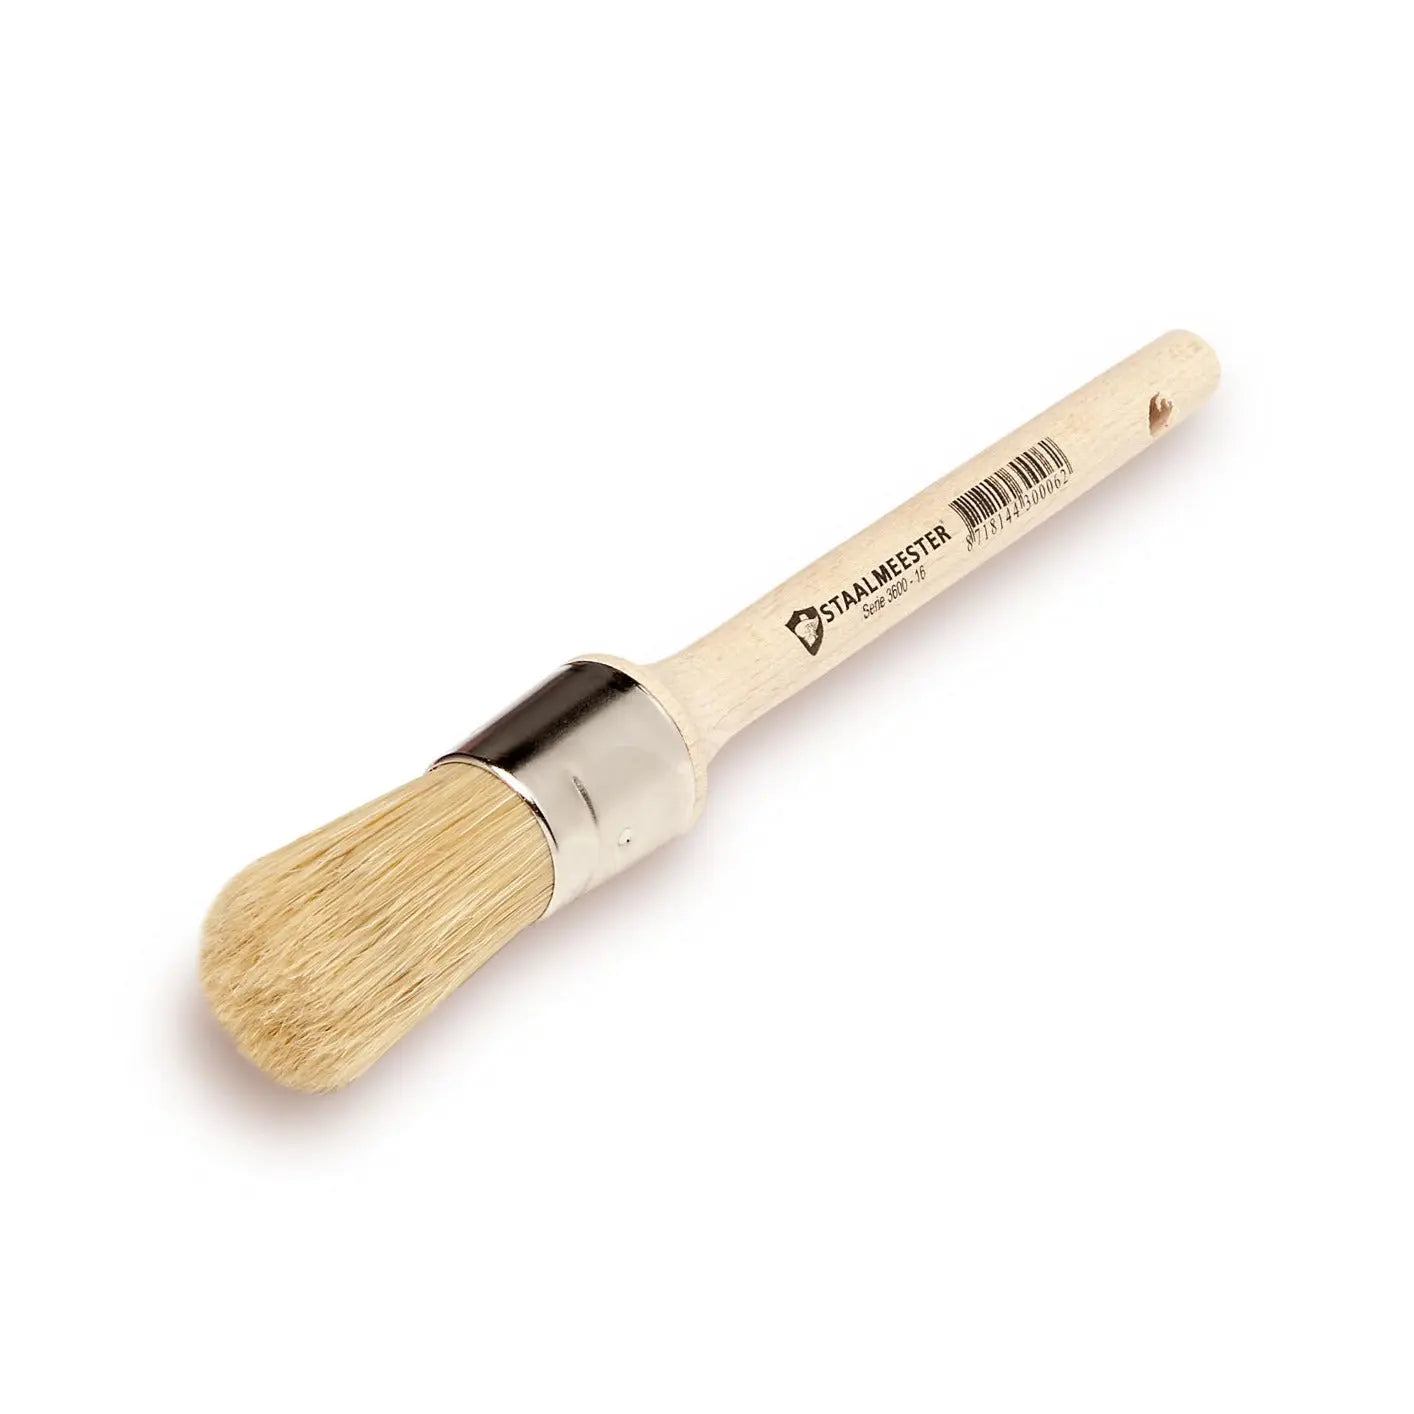 Staalmeester natural wax brush #16 at Home Smith